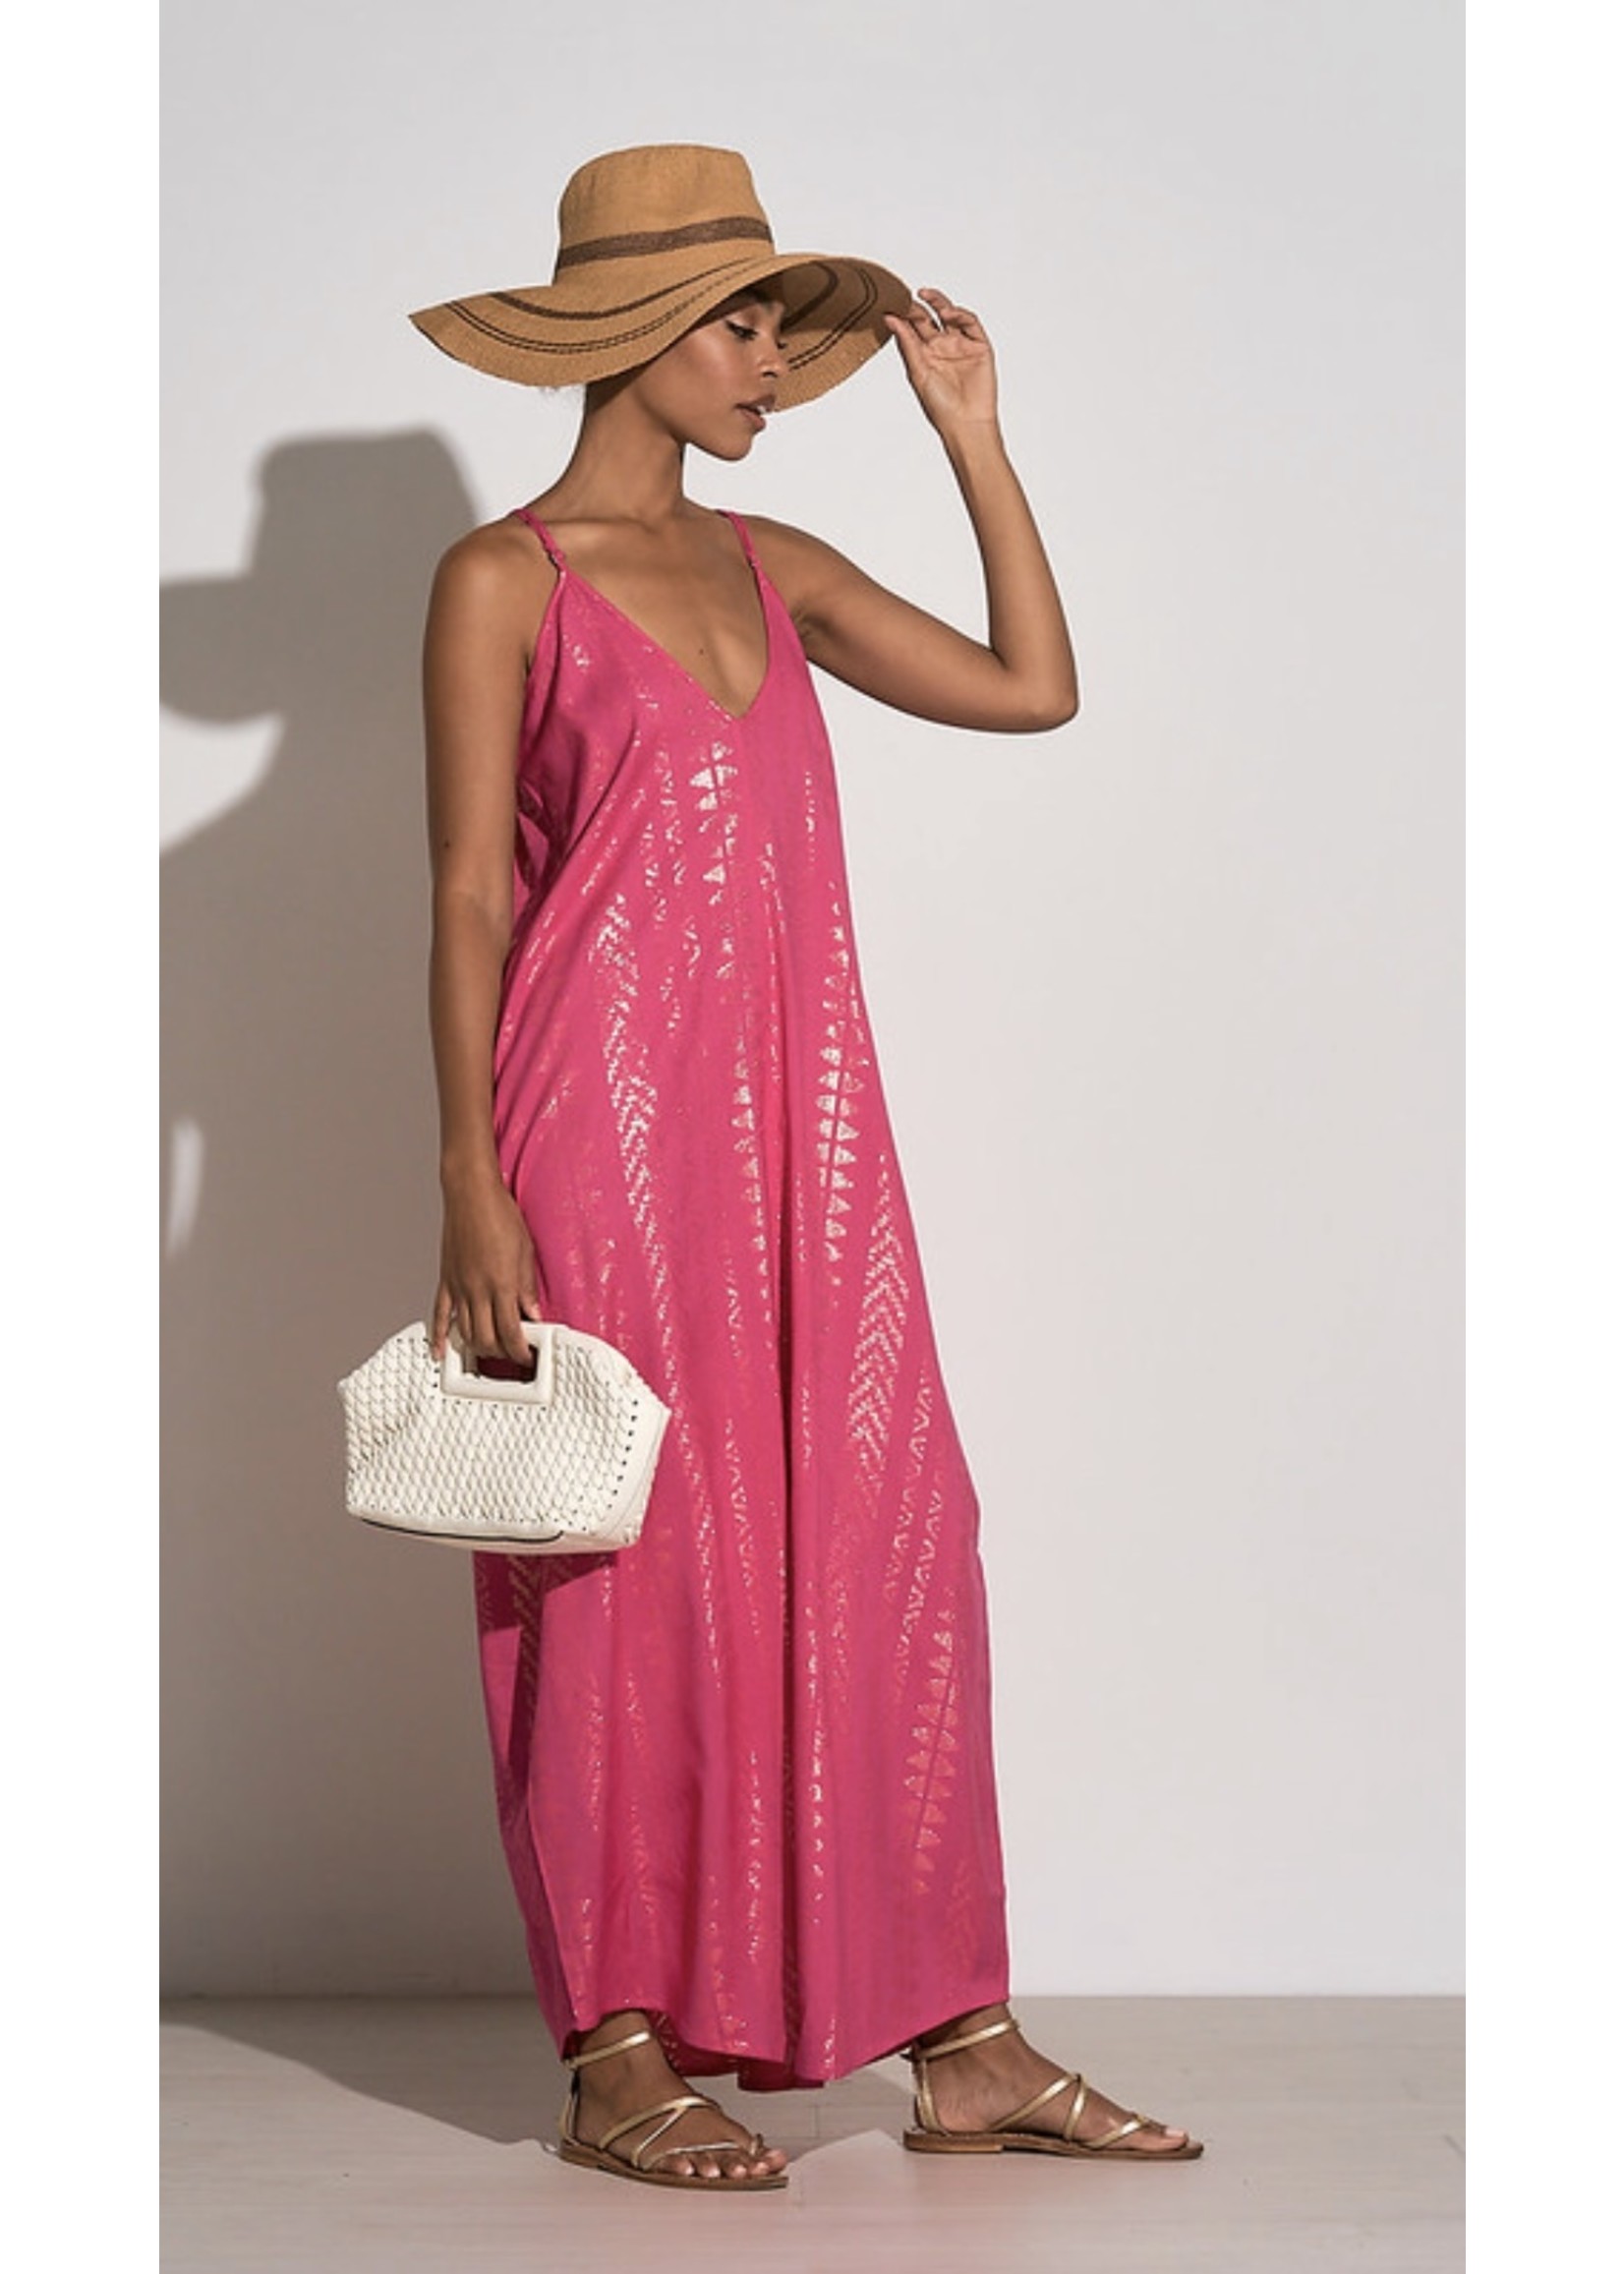 PINK AND GOLD MAXI